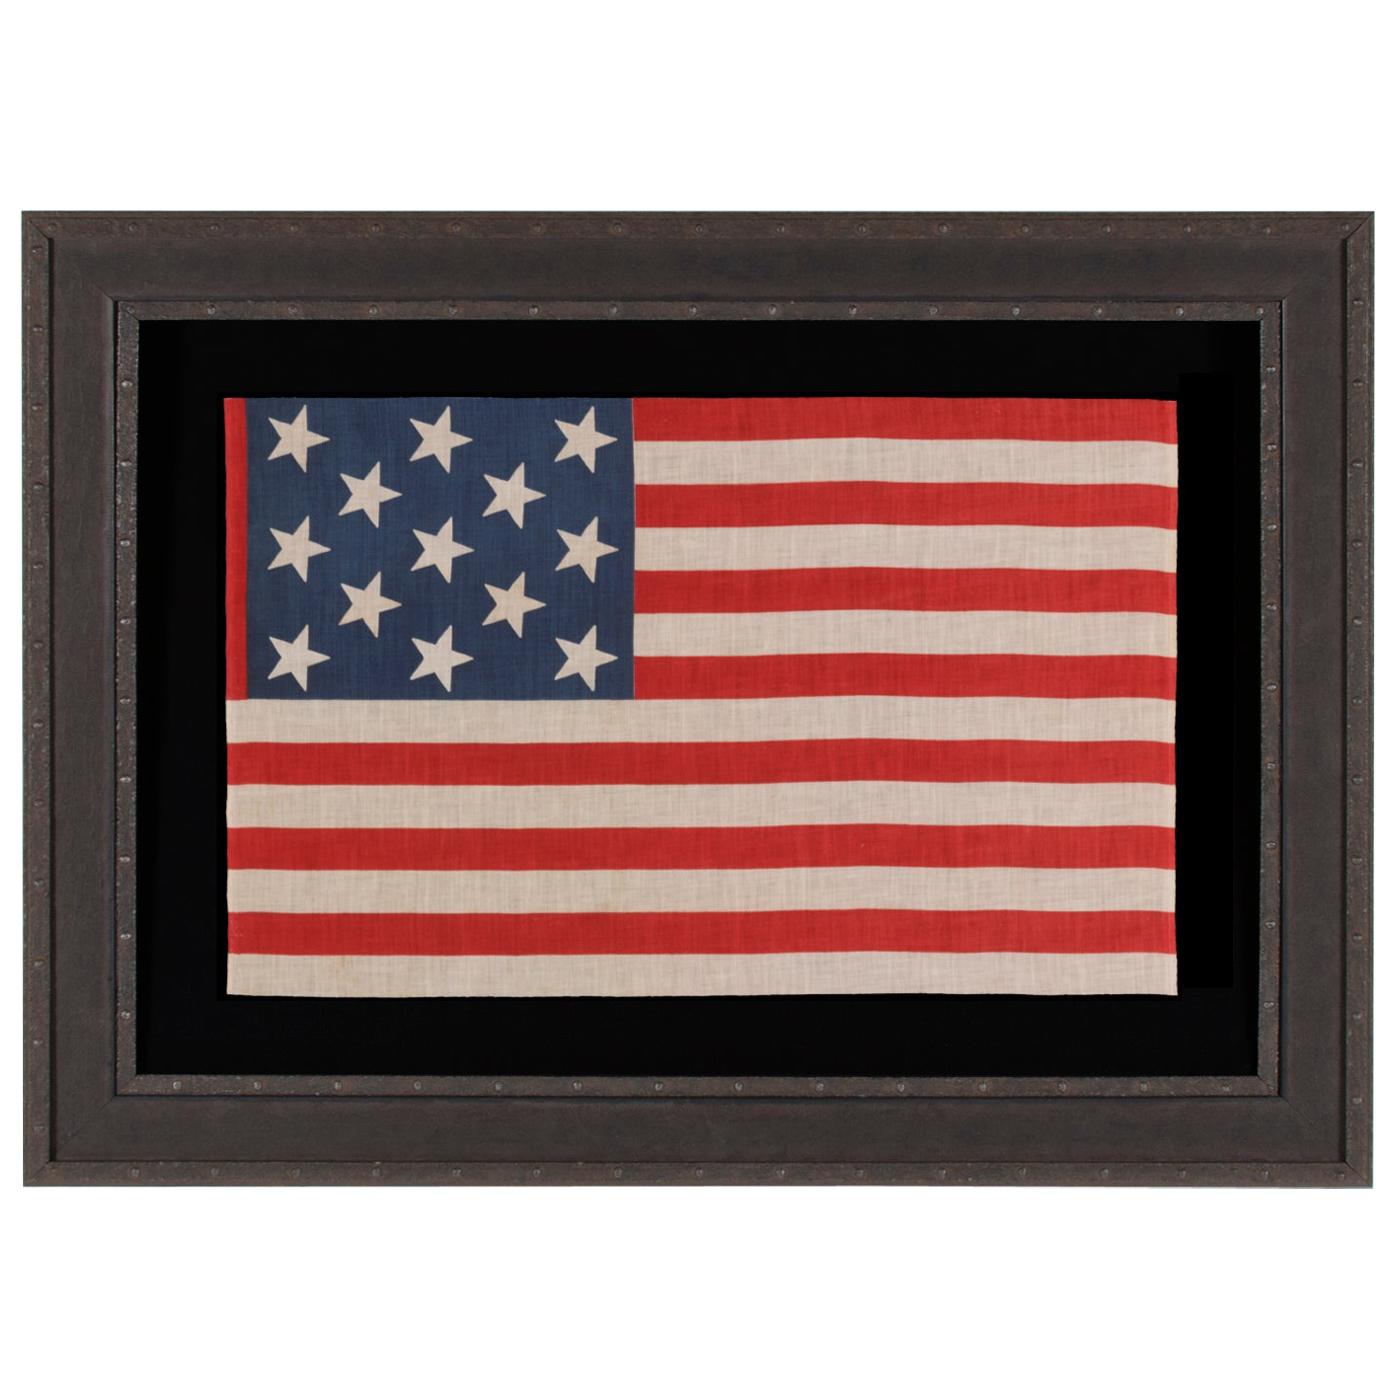 13 Star Parade Flag with Stars in a 3-2-3-2-3 Pattern, circa 1876-1898